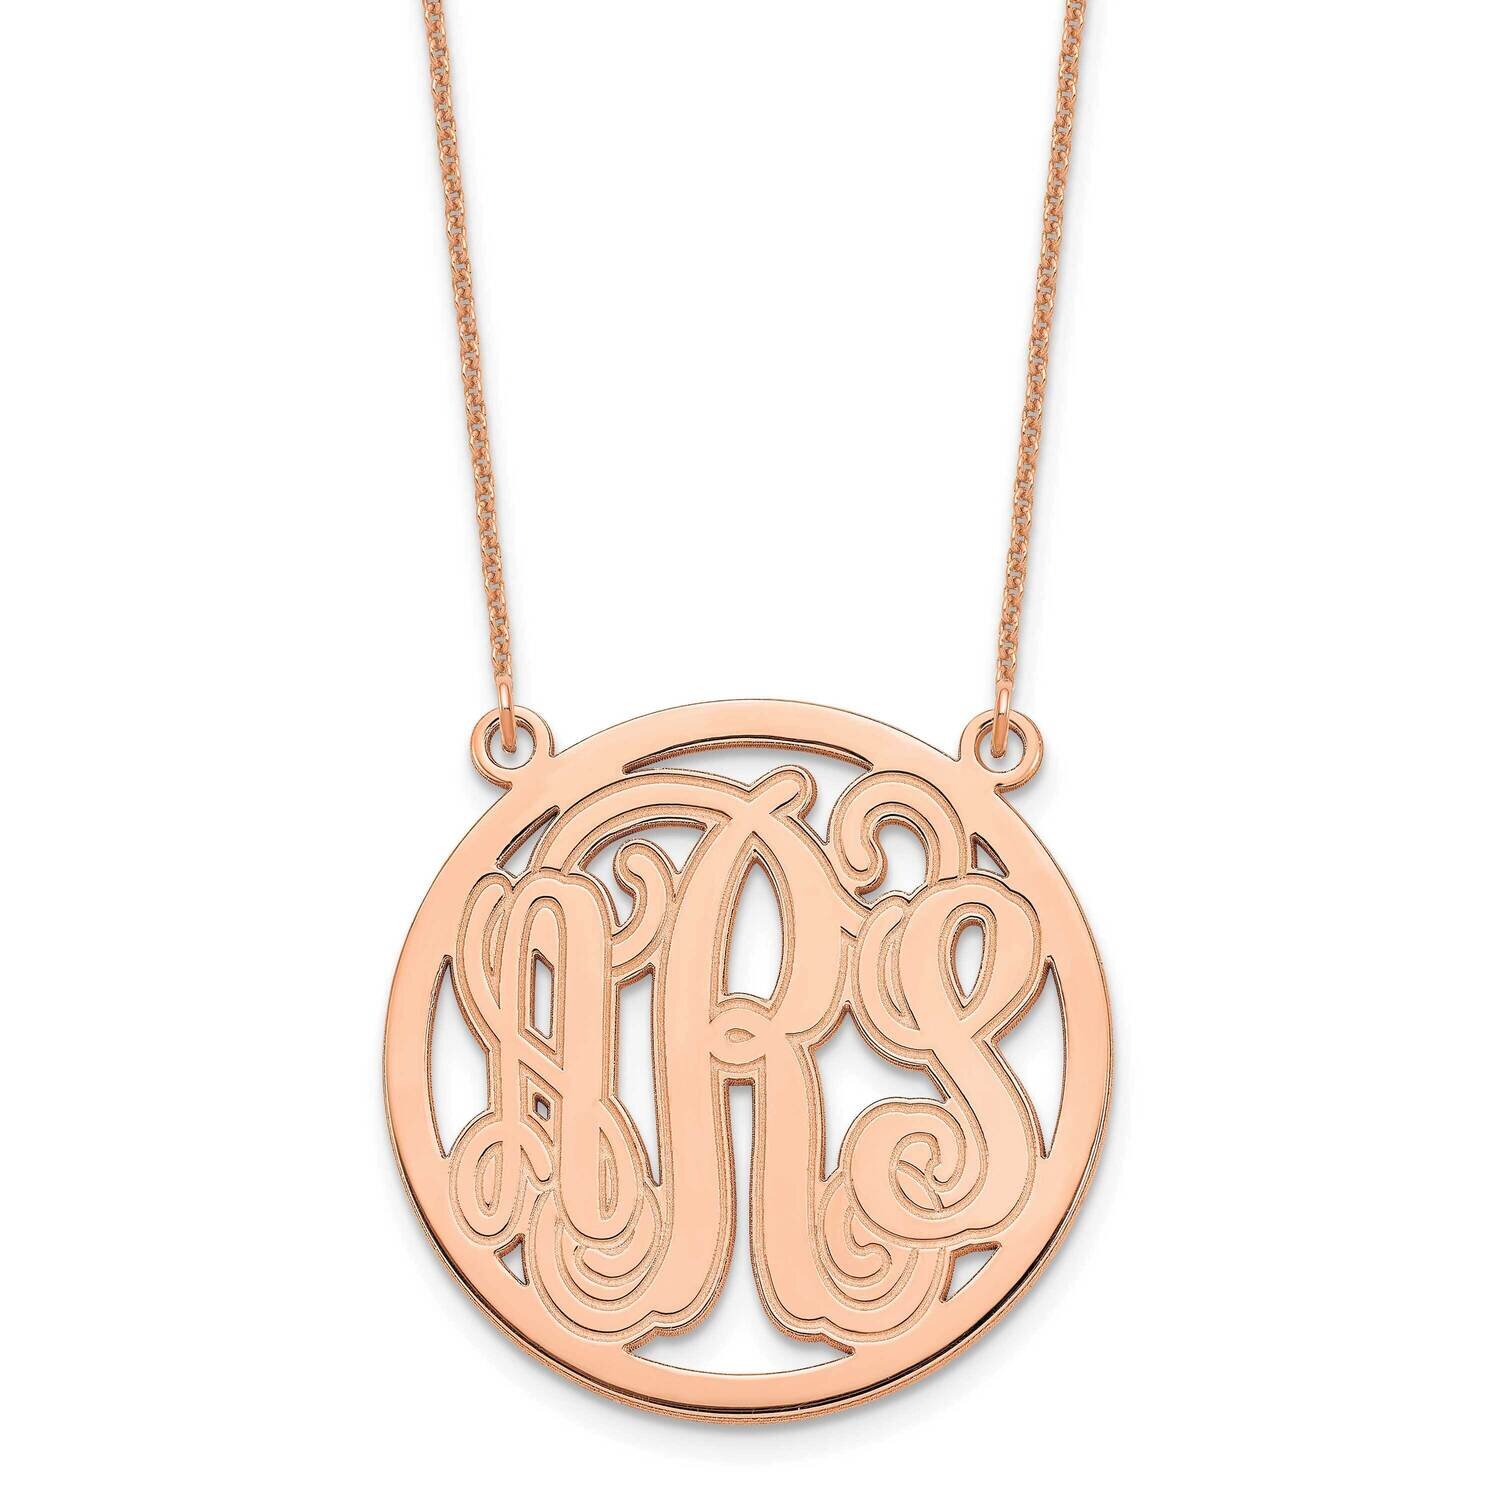 Etched Monogram Circle Necklace 14k Rose Gold Small XNA566R